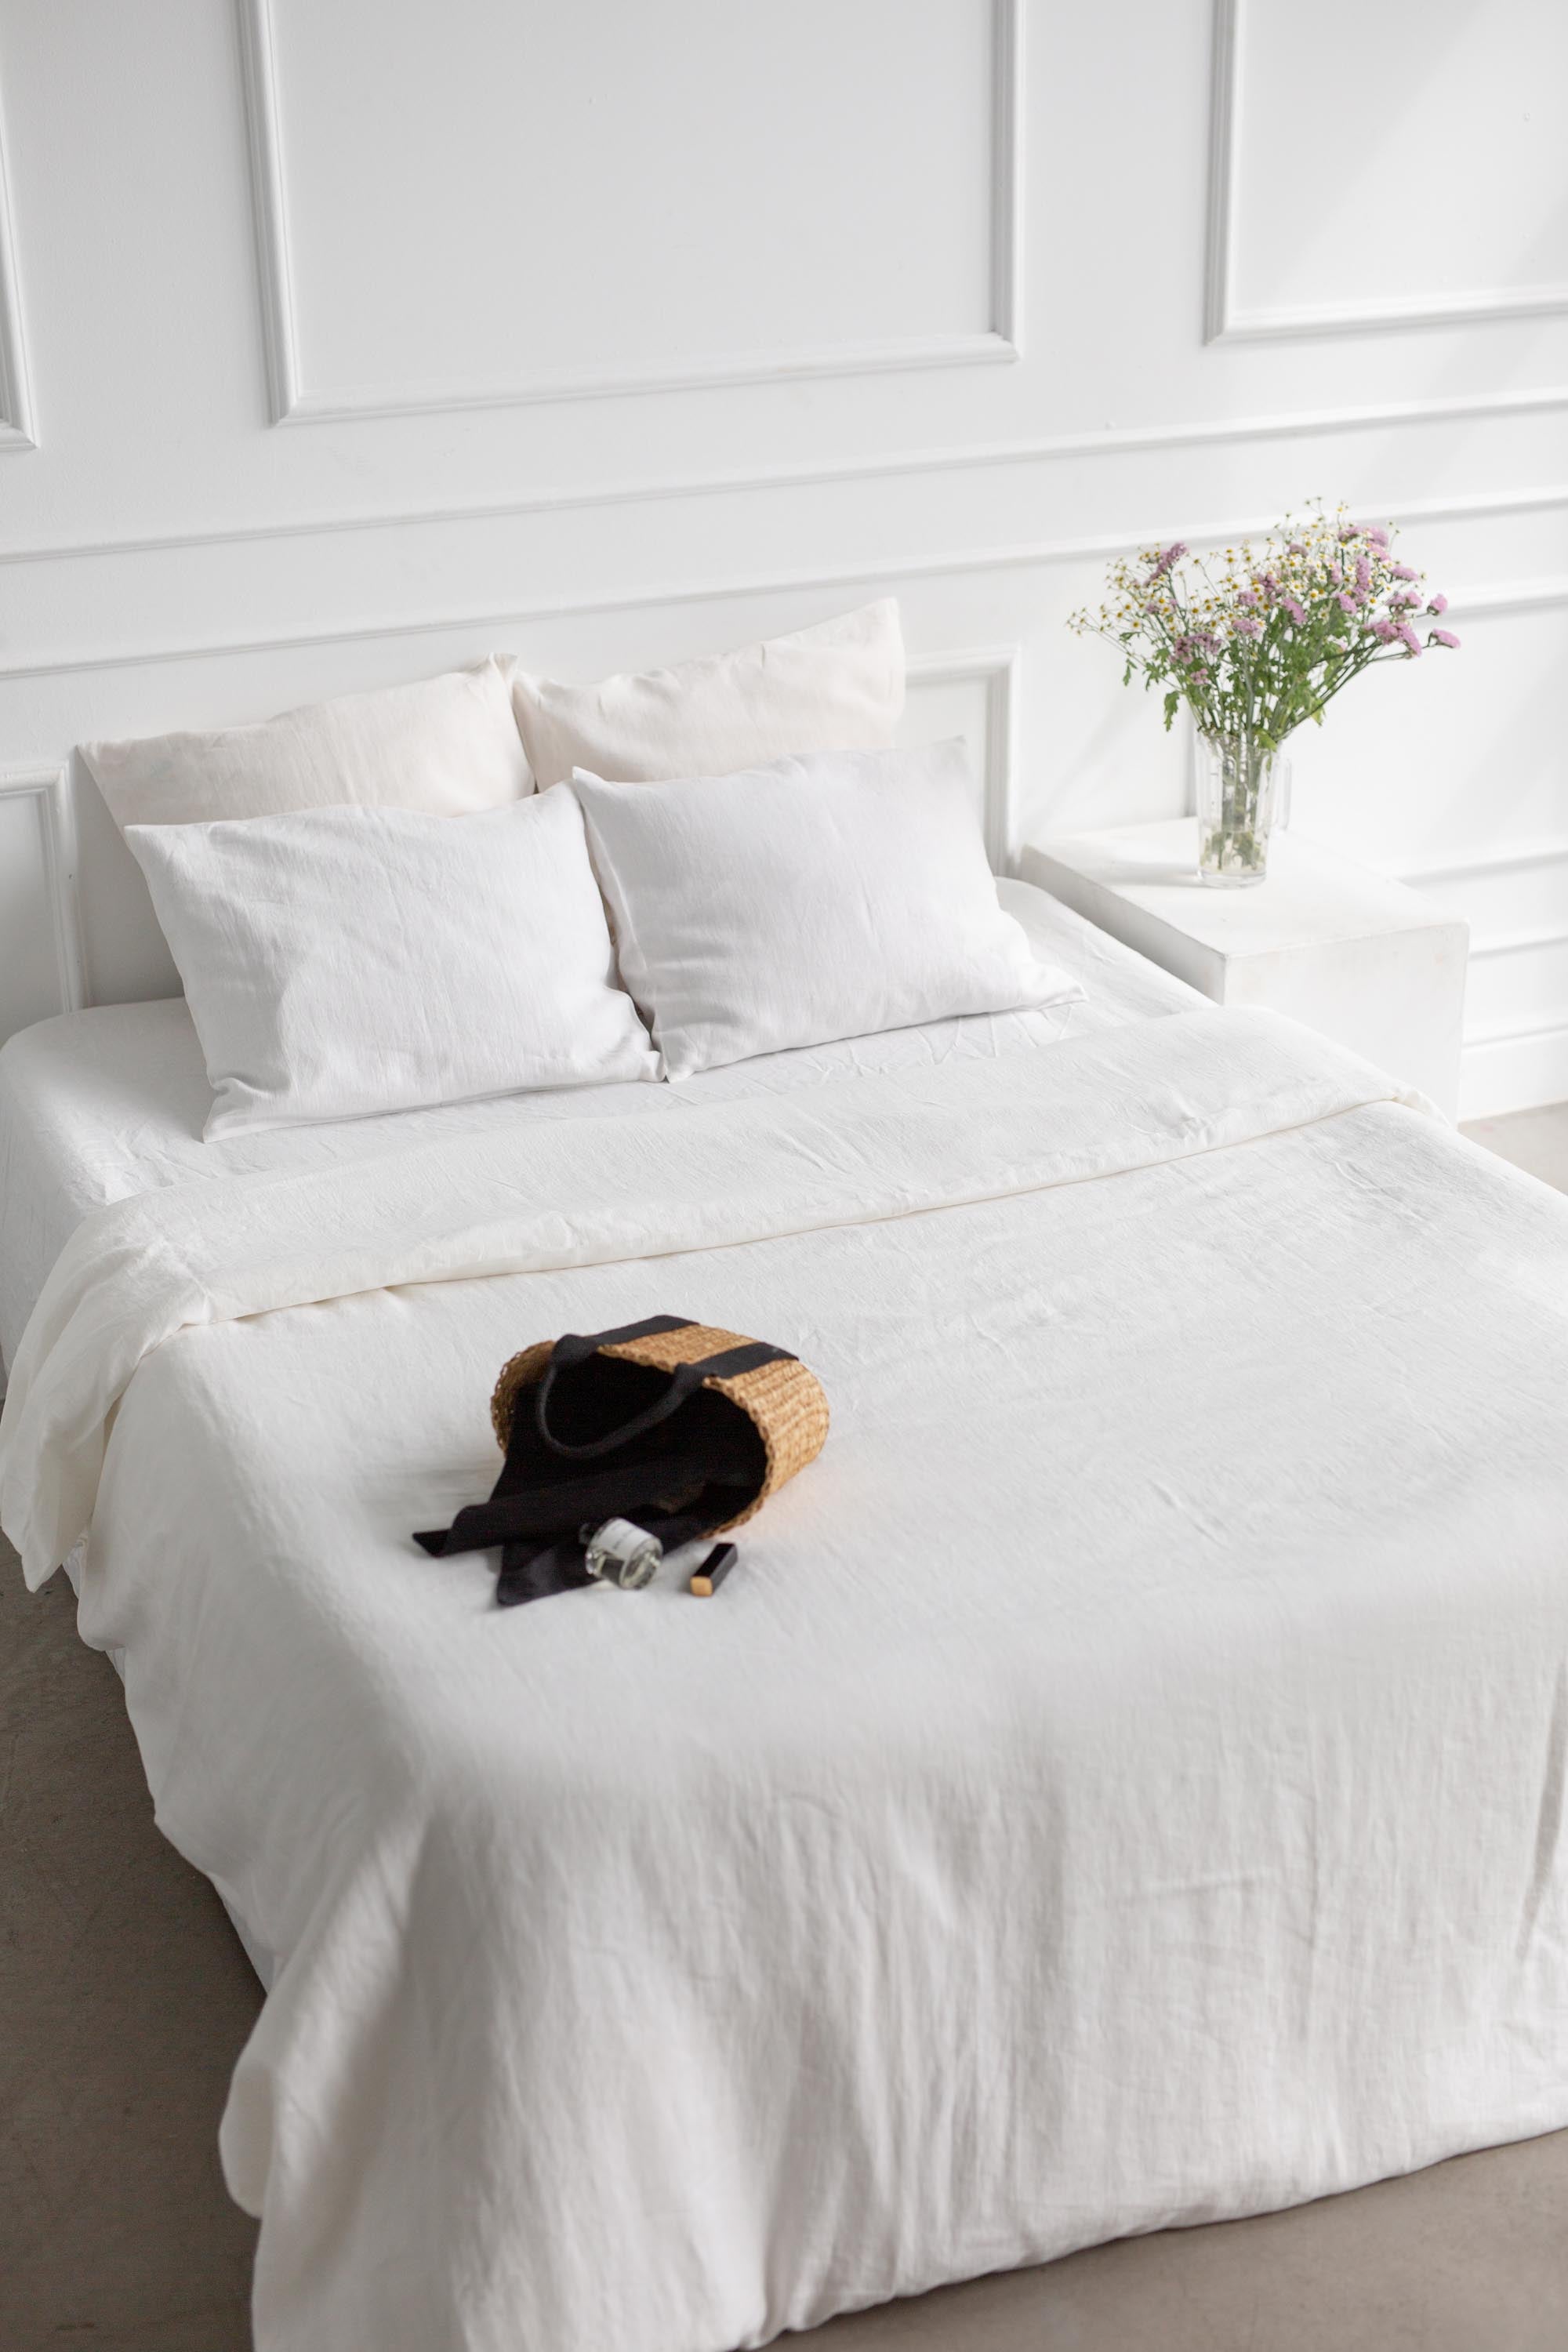 Bed With White Linen Duvet Cover By AmourlInen